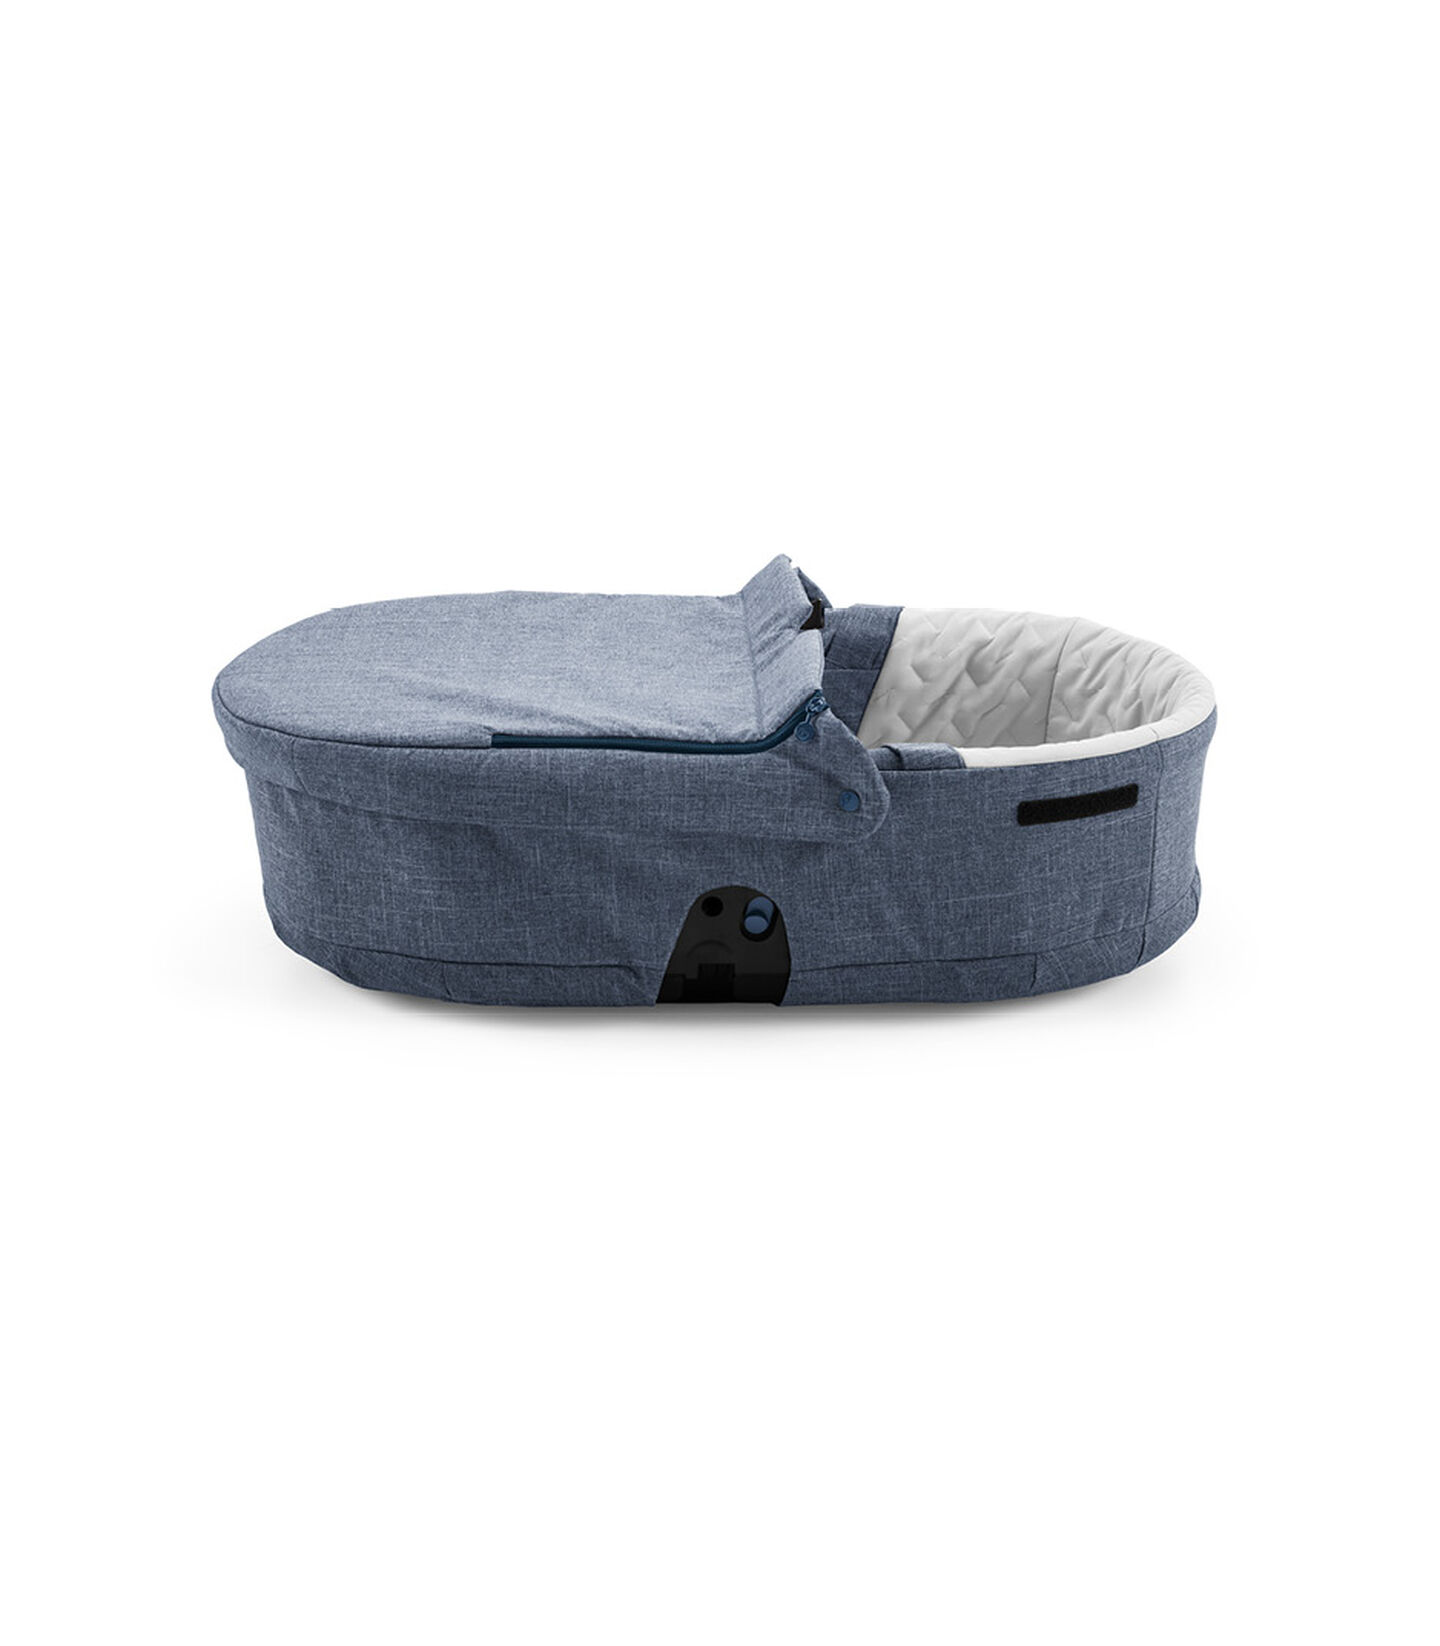 Stokke® Beat Carry Cot Blue Melange, 藍麻色, mainview view 1